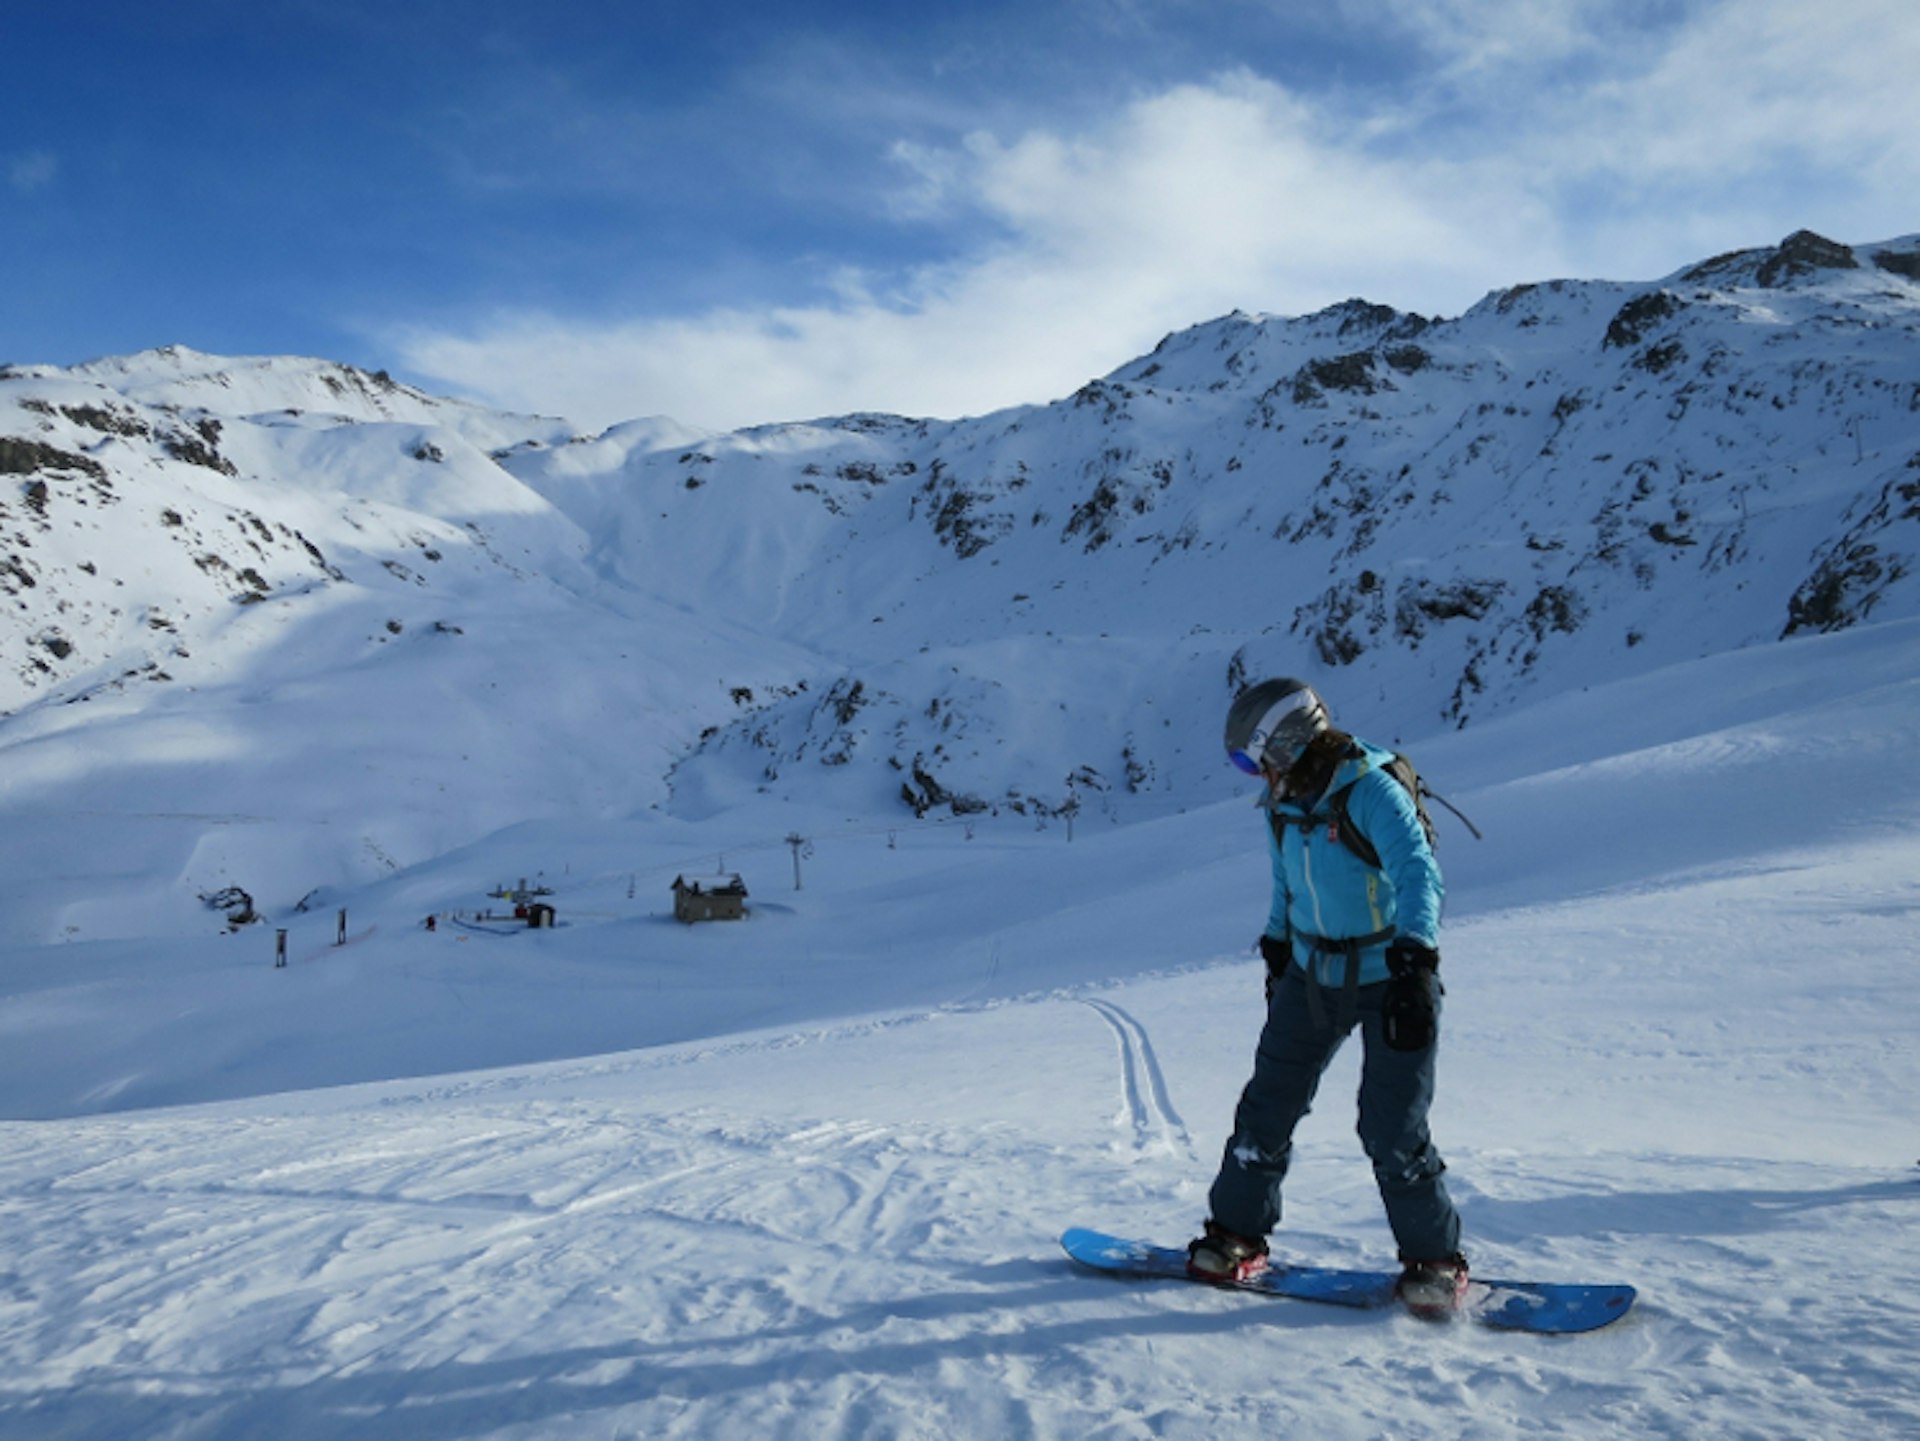 A snowboarder rides off-piste to a chair lift, La Plagne, French Alps.